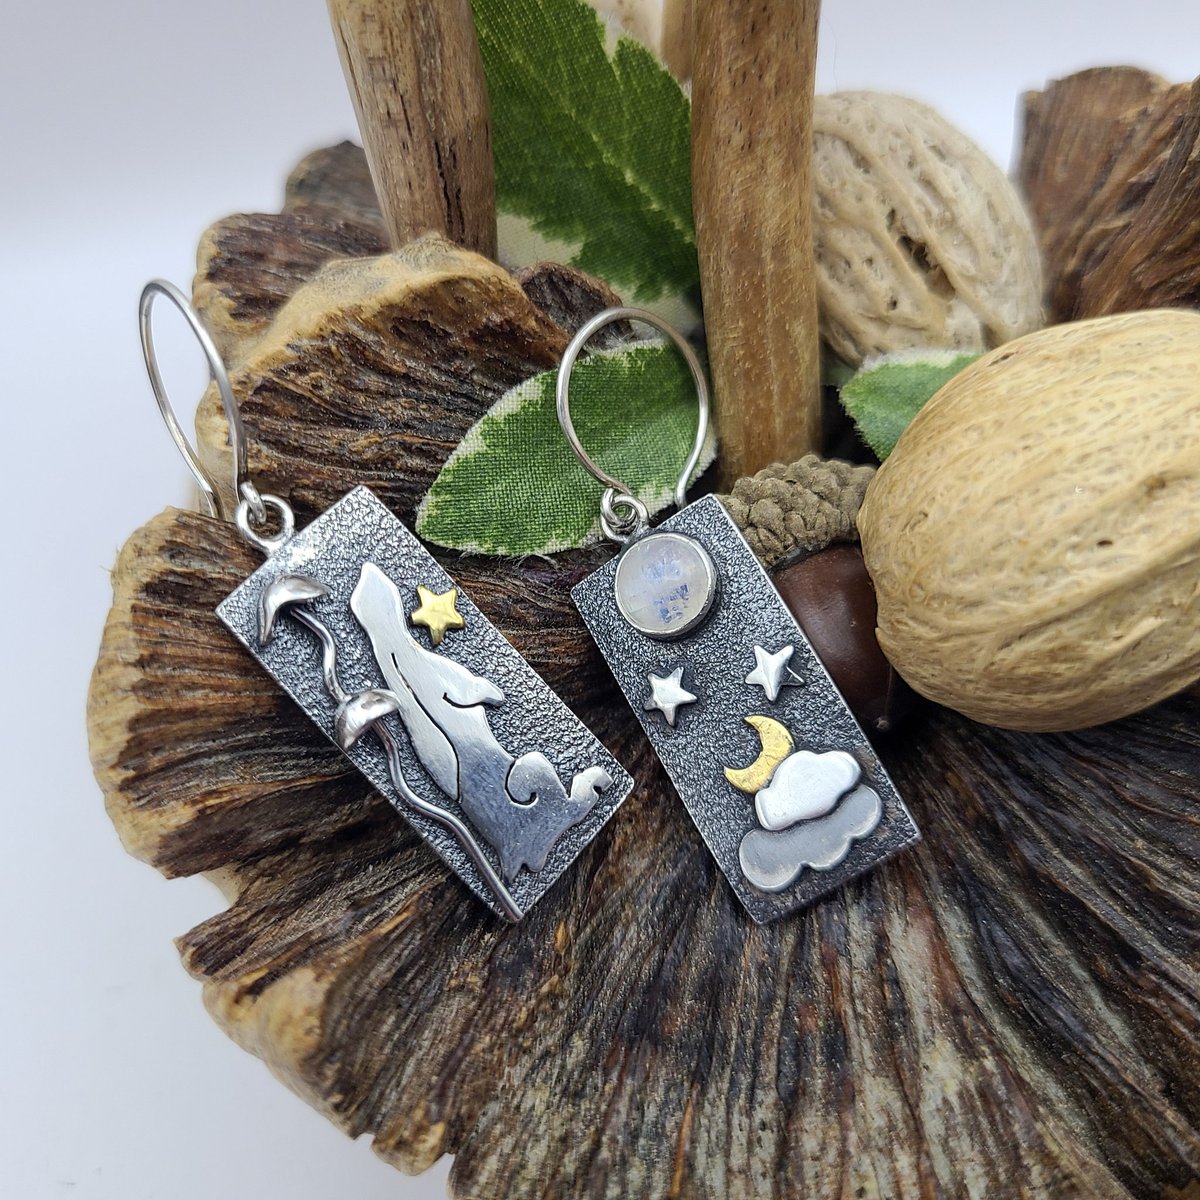 Moongazing hare mismatched panel earrings. Featuring a moongazing hare in the mushrooms and the moon in the clouds. Finished with beautiful 24 karat gold keum boo hand gilding. emmascottjewellery.com/product-page/m… #UKGiftHour #UKGiftAM #MHHSBD #shopindie #cottagecore